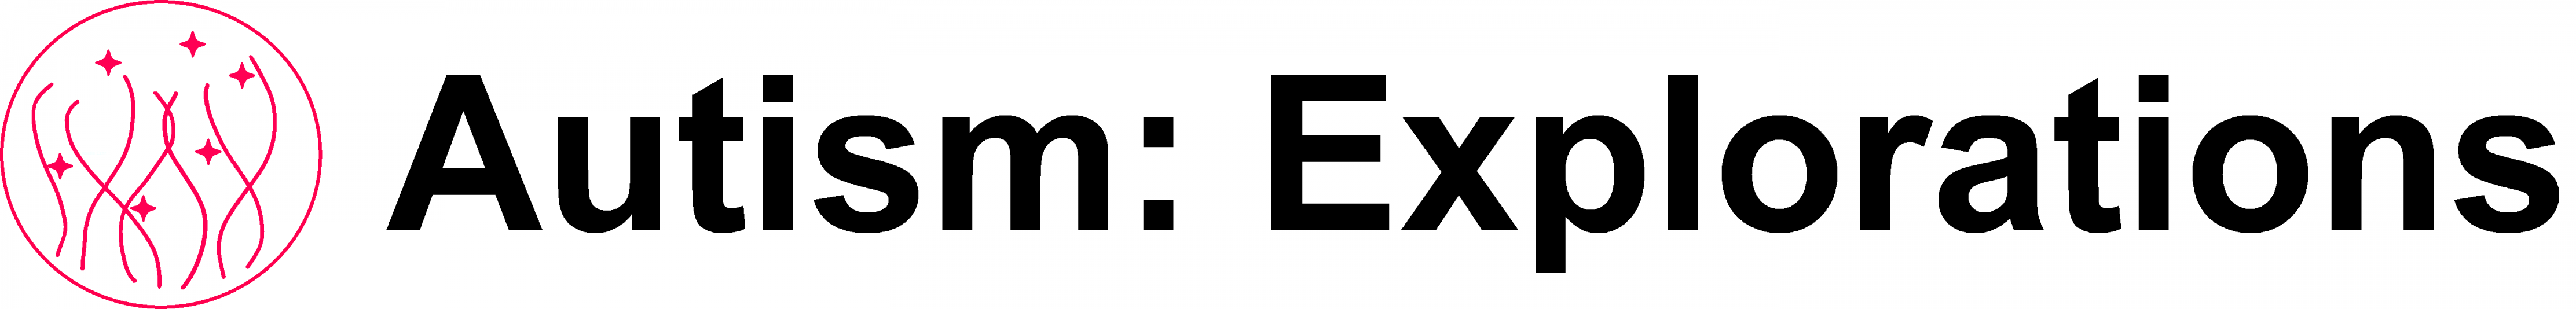 Brief description: "Autism: Explorations" / Longer description: The website’s logo and title. On the left, a pink outlined circle contains wavy vertical line streaks and four-pointed stars, both also pink. On the right, the text reads “Autism: Explorations” in black, bold, and Arial font.